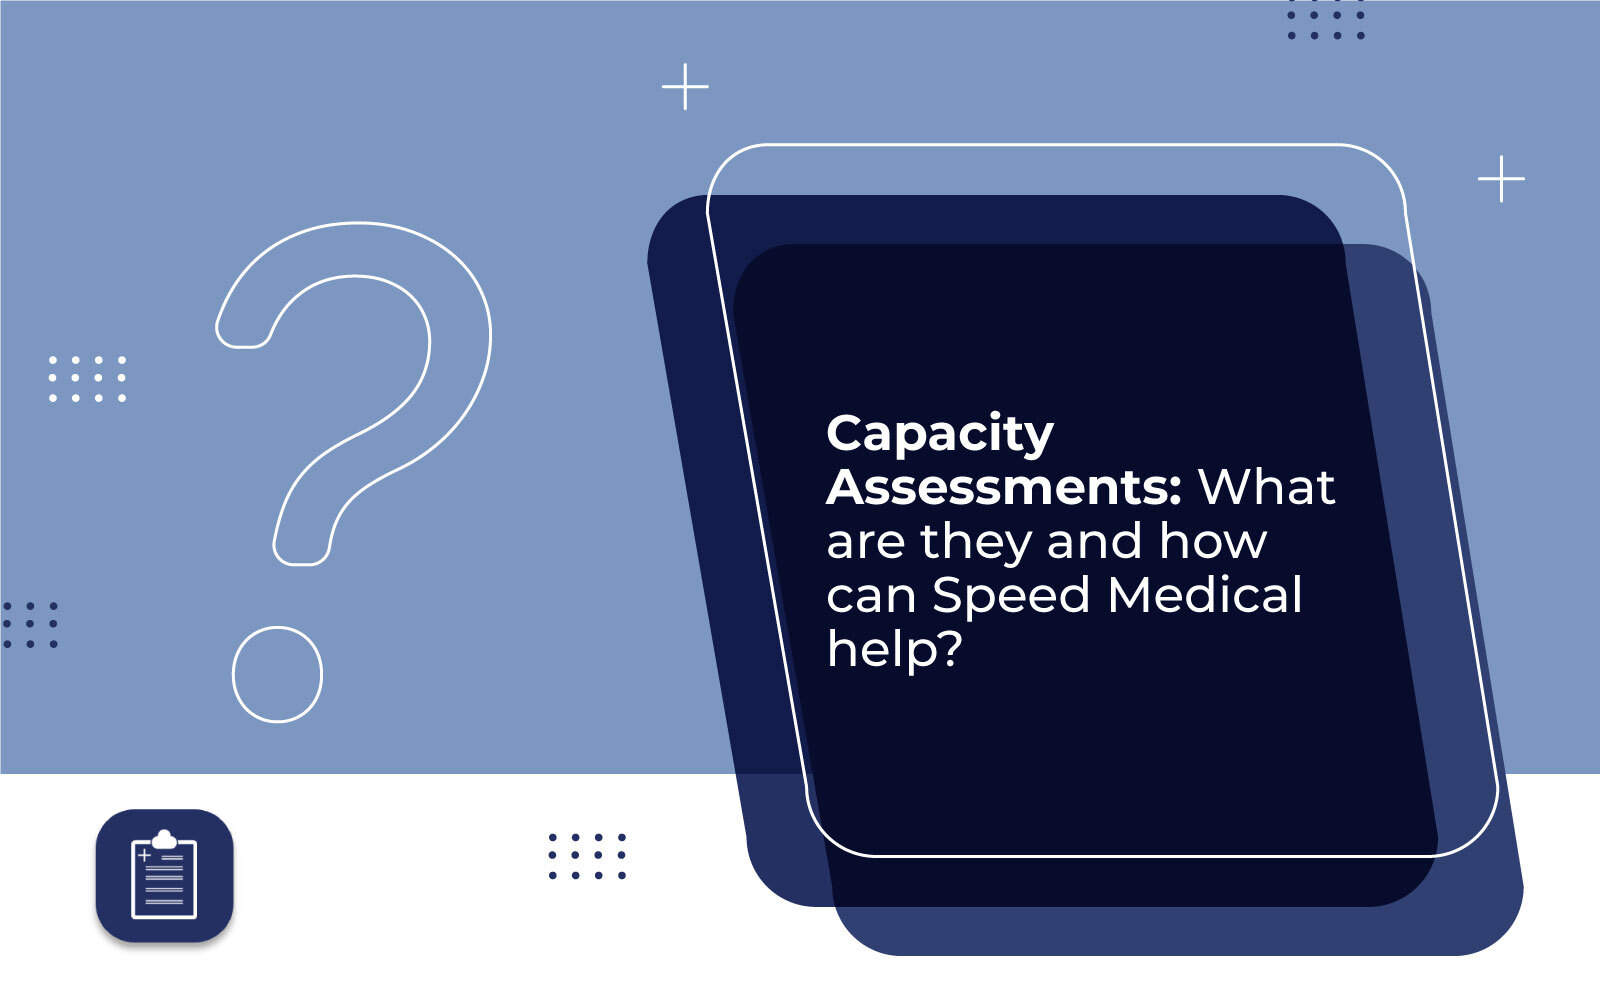 Capacity Assessments: What are they and how can Speed Medical help?